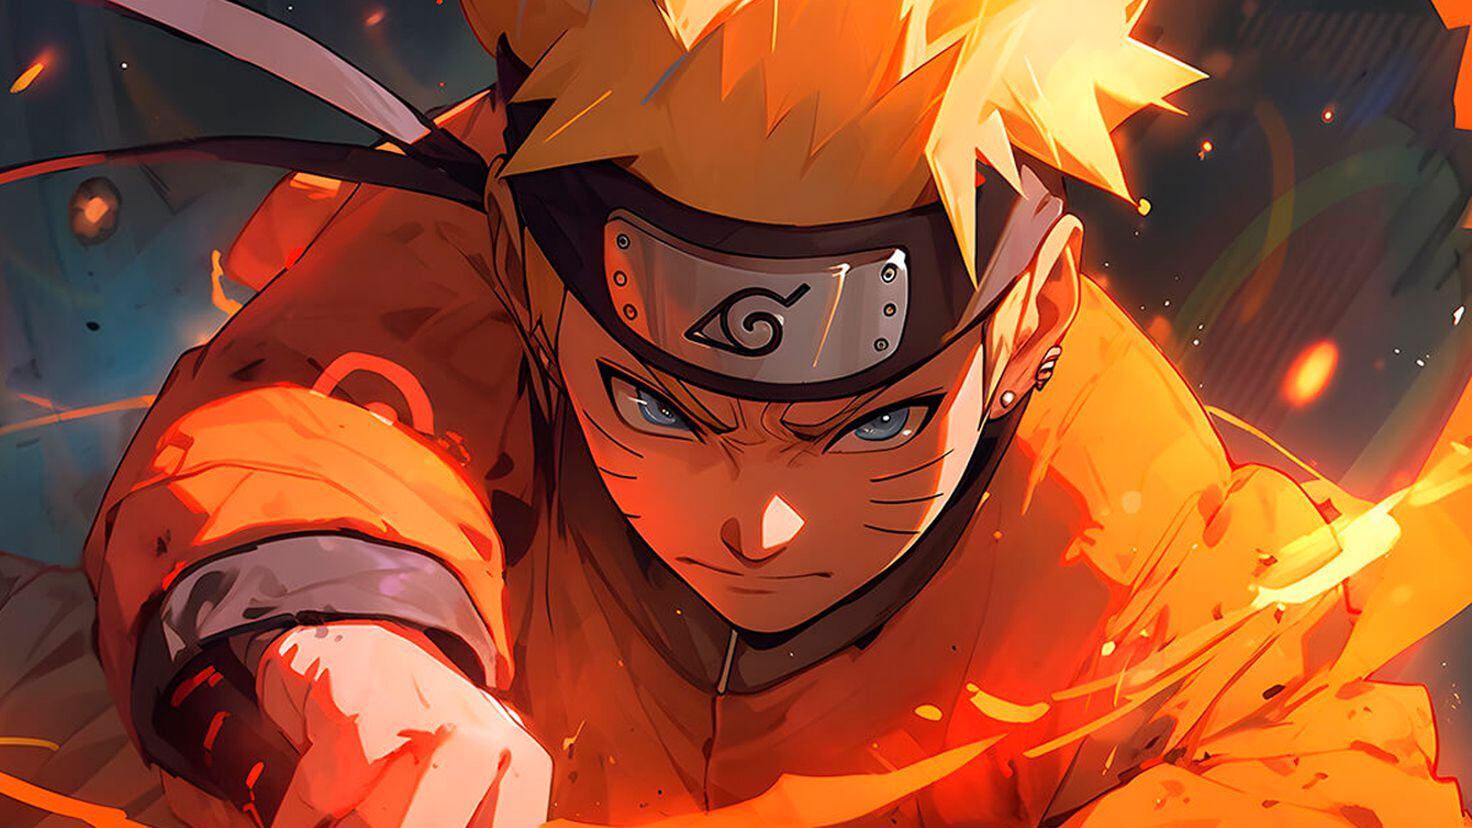 The live-action 'Naruto' movie is back on track with a new